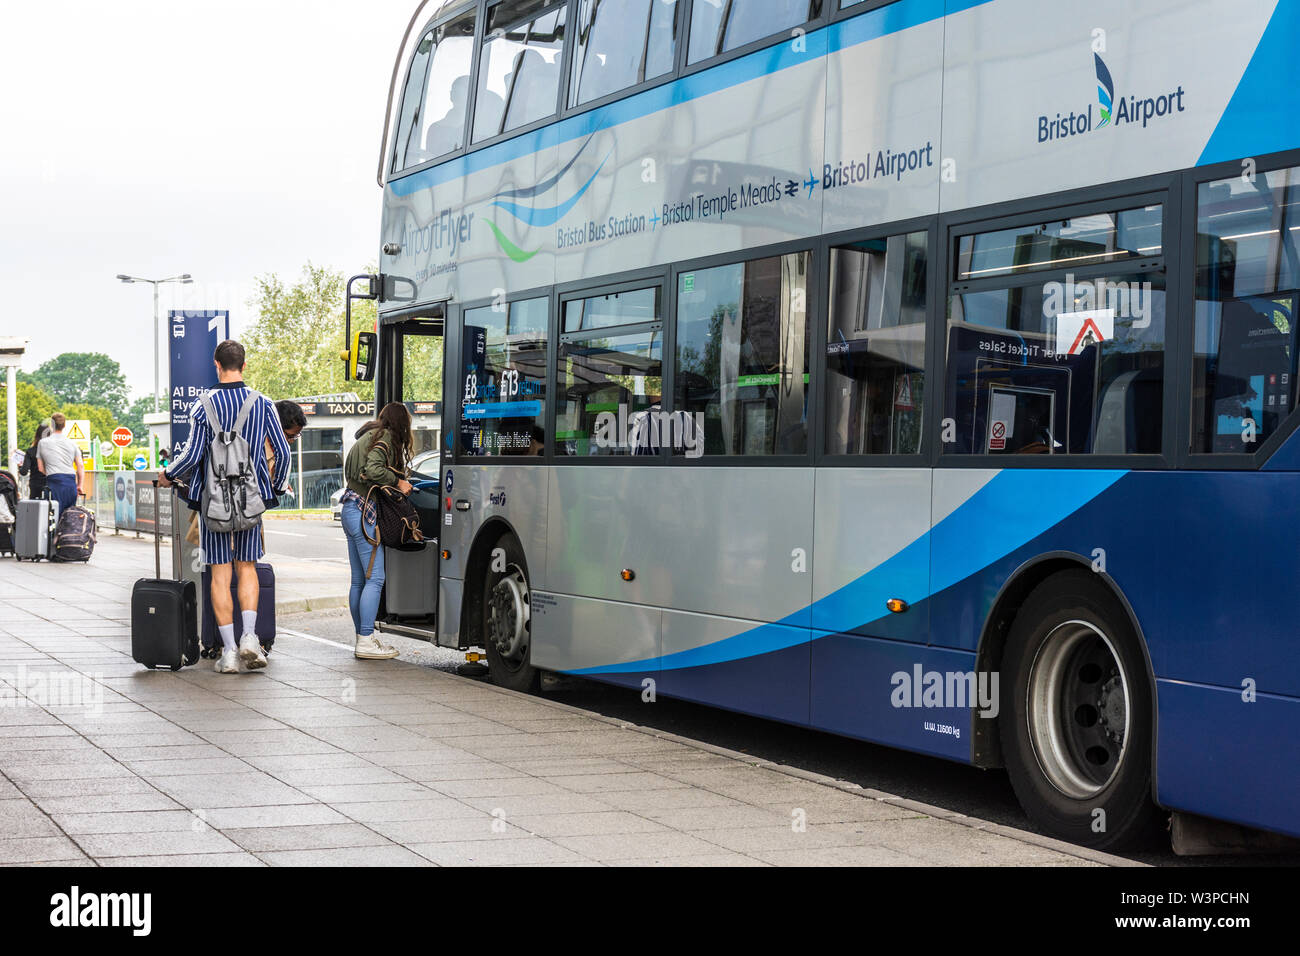 Boarding The Bristol Airport Flyer Bus outside the terminal building. Stock Photo